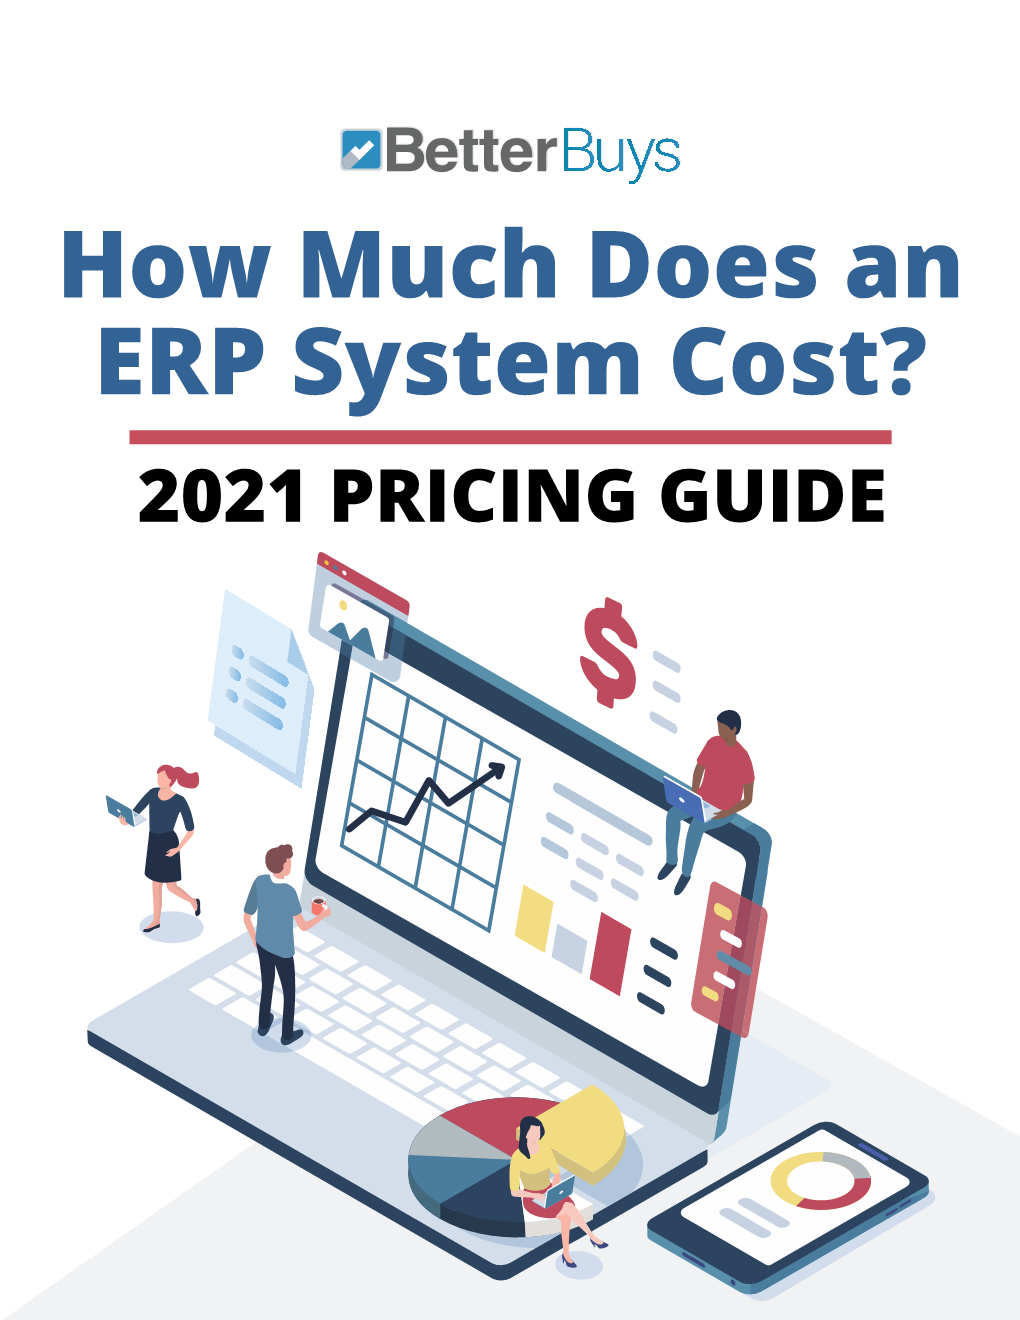 How Much Does an ERP System Cost? 2021 PRICING GUIDE How Much Does an ERP System Cost? 2021 PRICING GUIDE